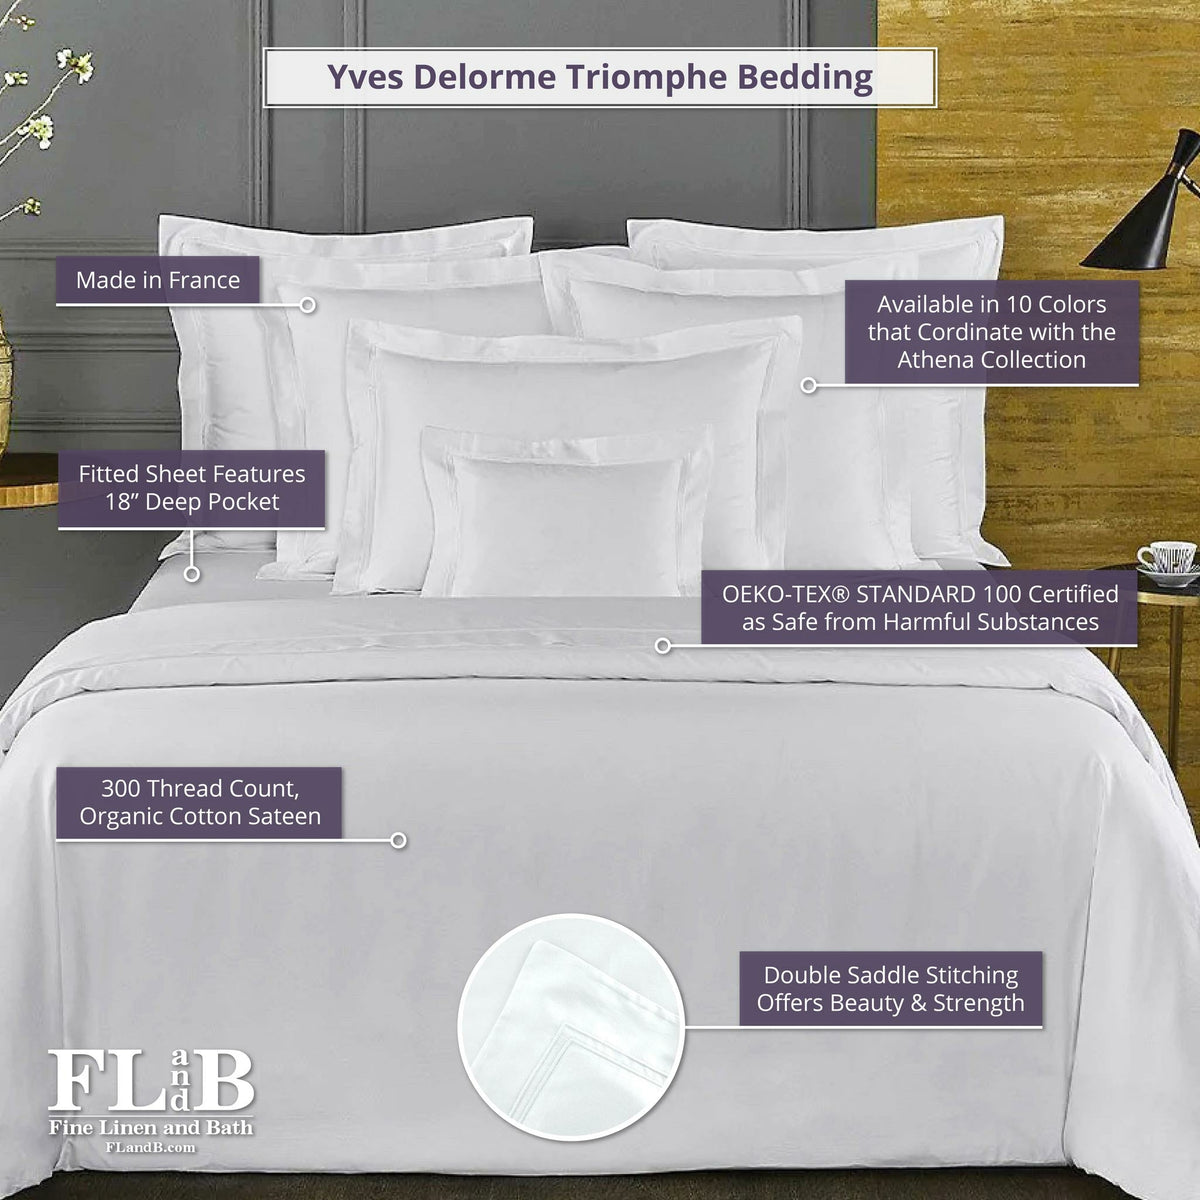 Yves Delorme Triomphe Bedding Fjord Fine Linens Where to Buy